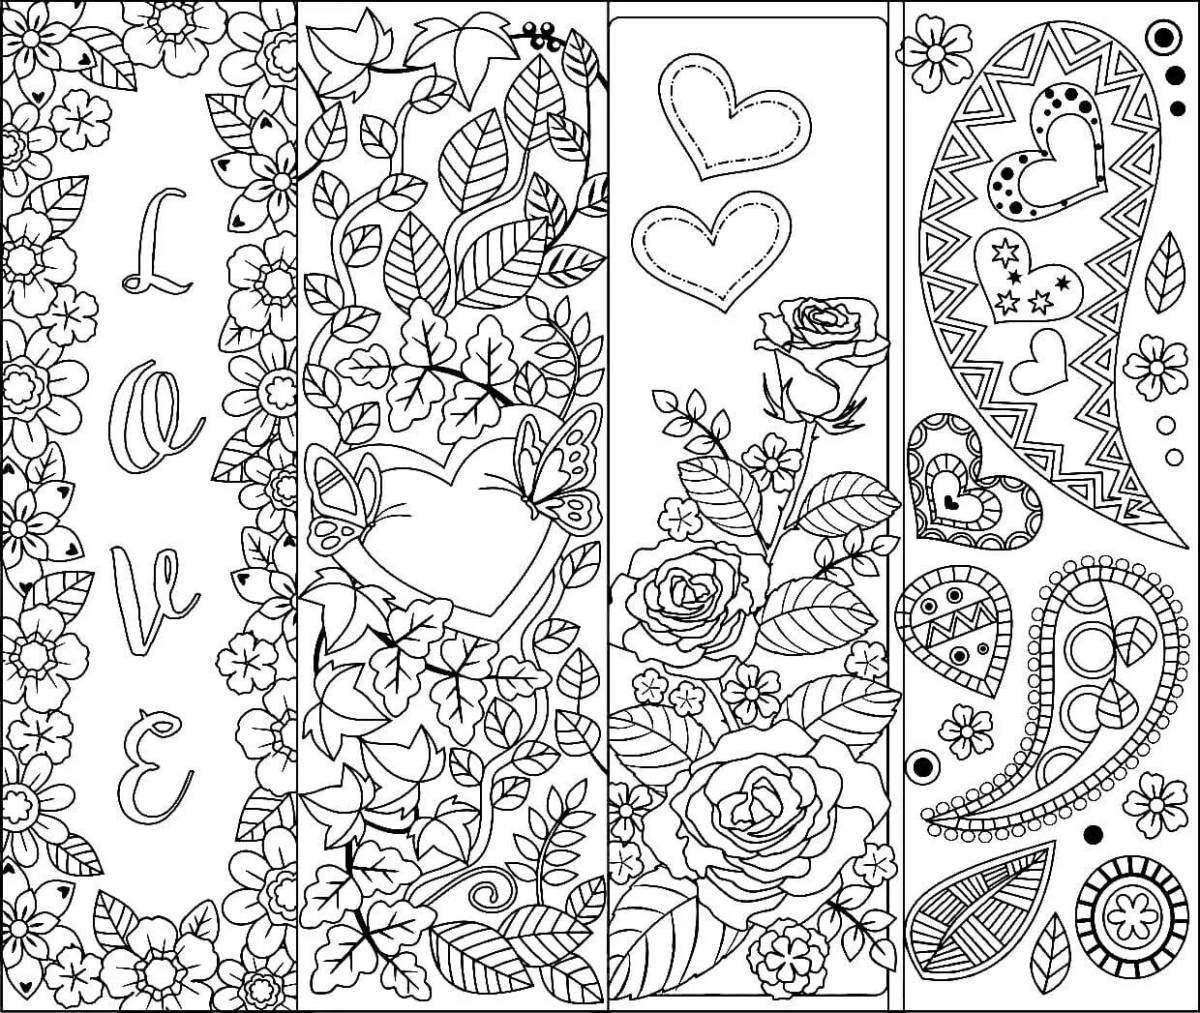 Great coloring book for a personal diary